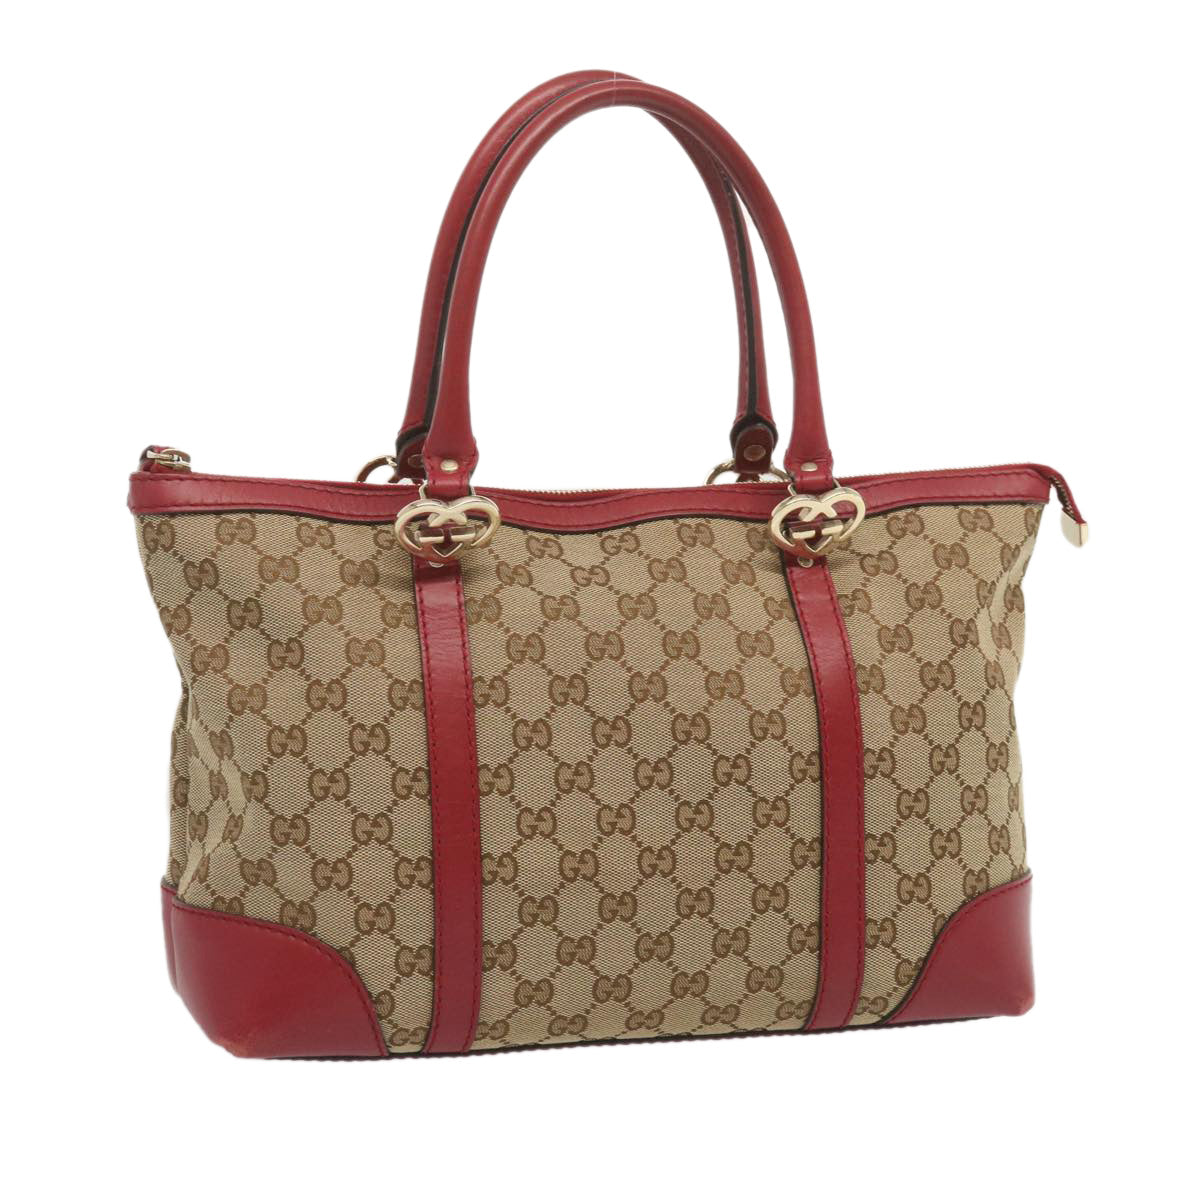 GUCCI GG Canvas Tote Bag Beige Red 257069 Auth 69451